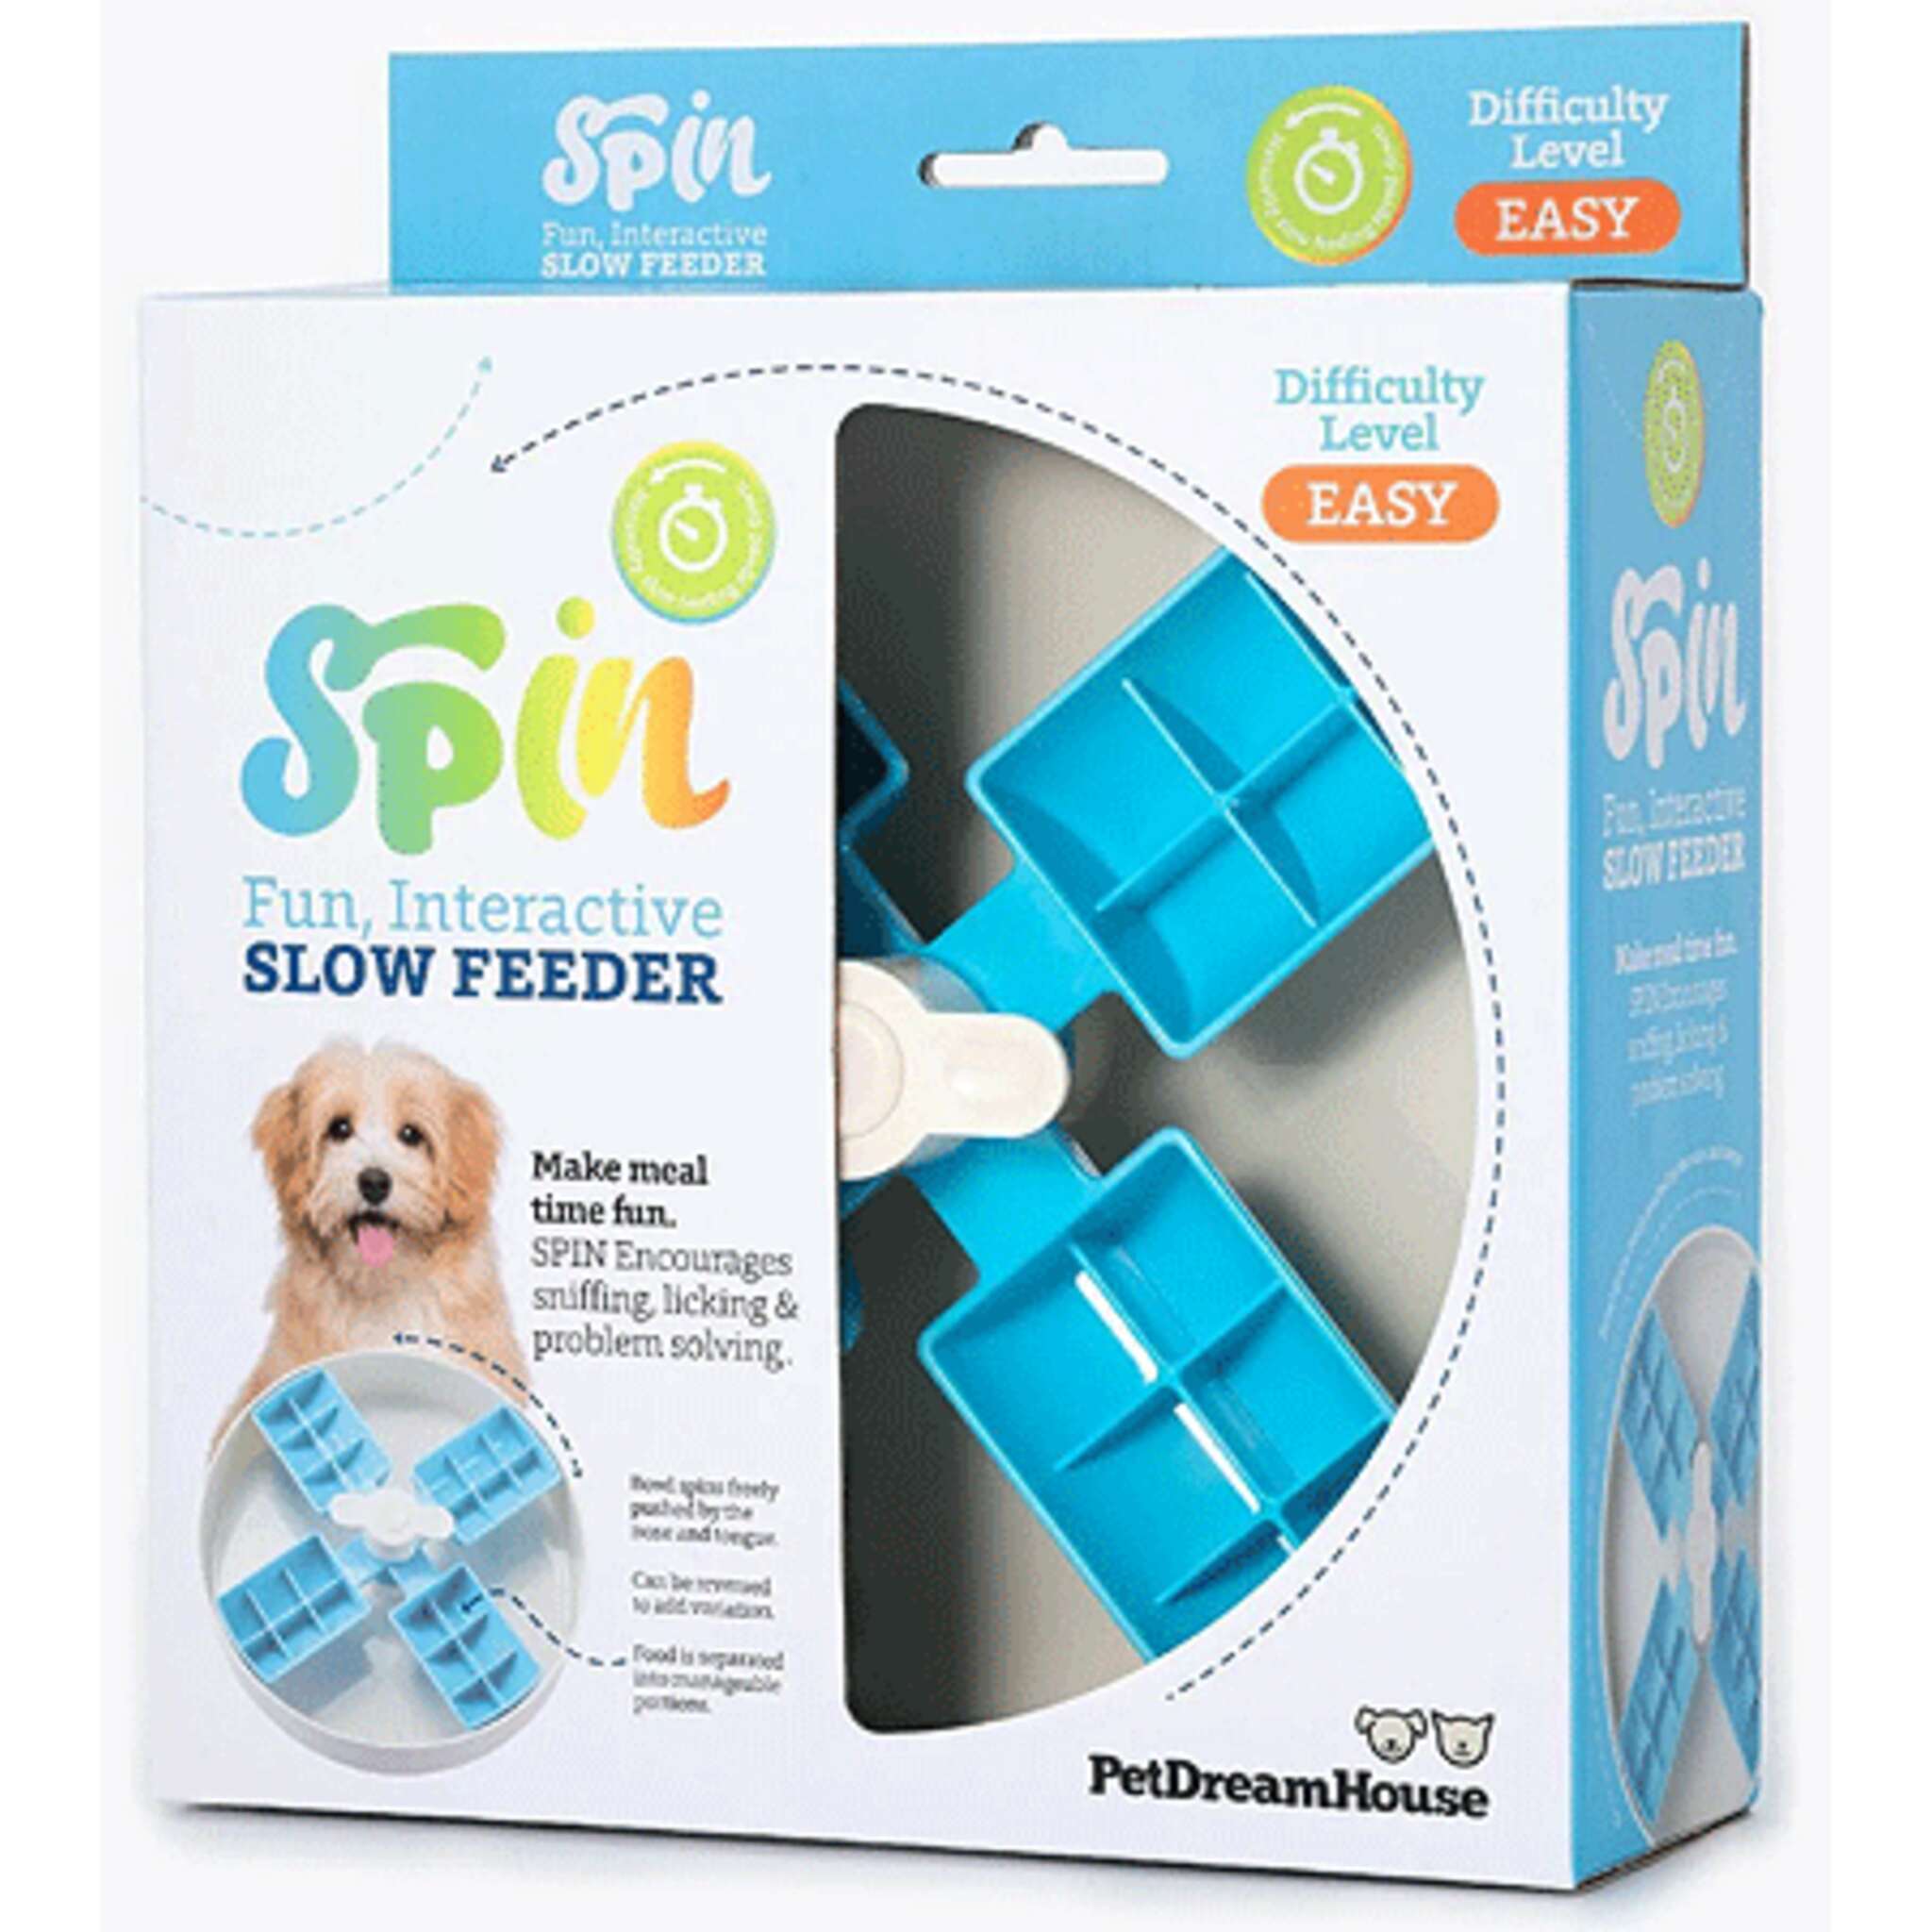 Pet Dream House Spin Interactive Slow Feeder Windmill Pet Bowl Blue